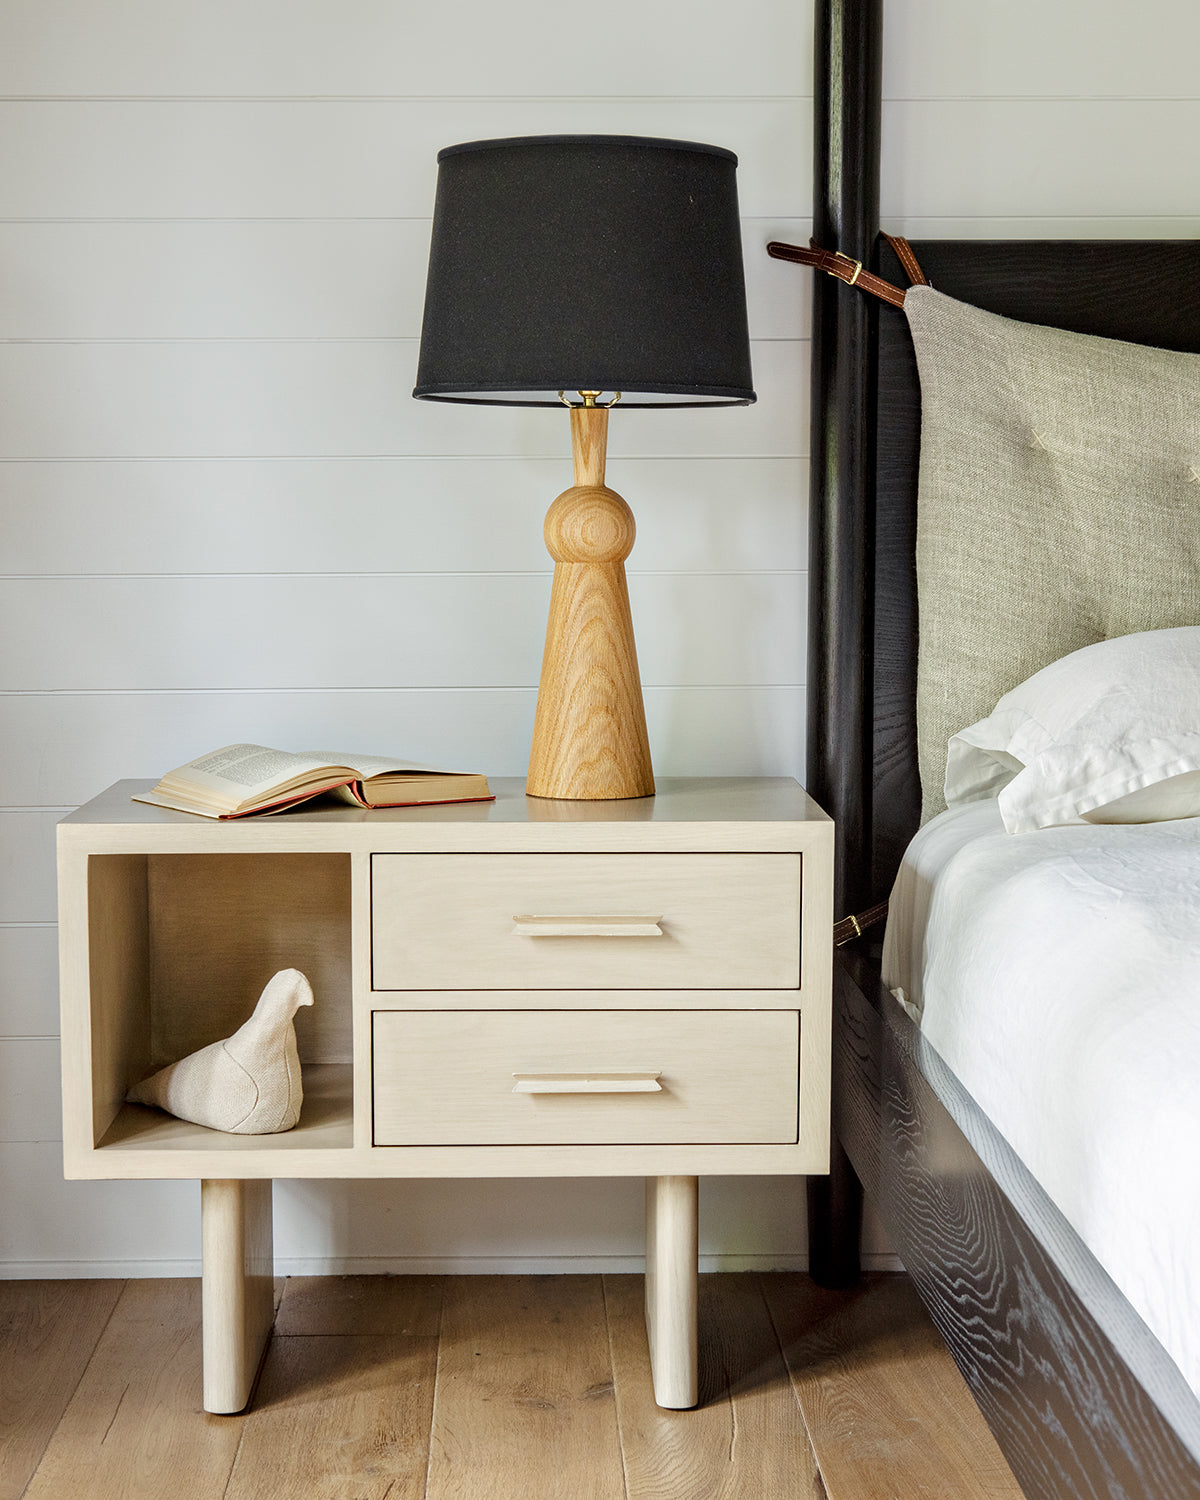 Bedside table lamp with natural solid wood body and black linen shade